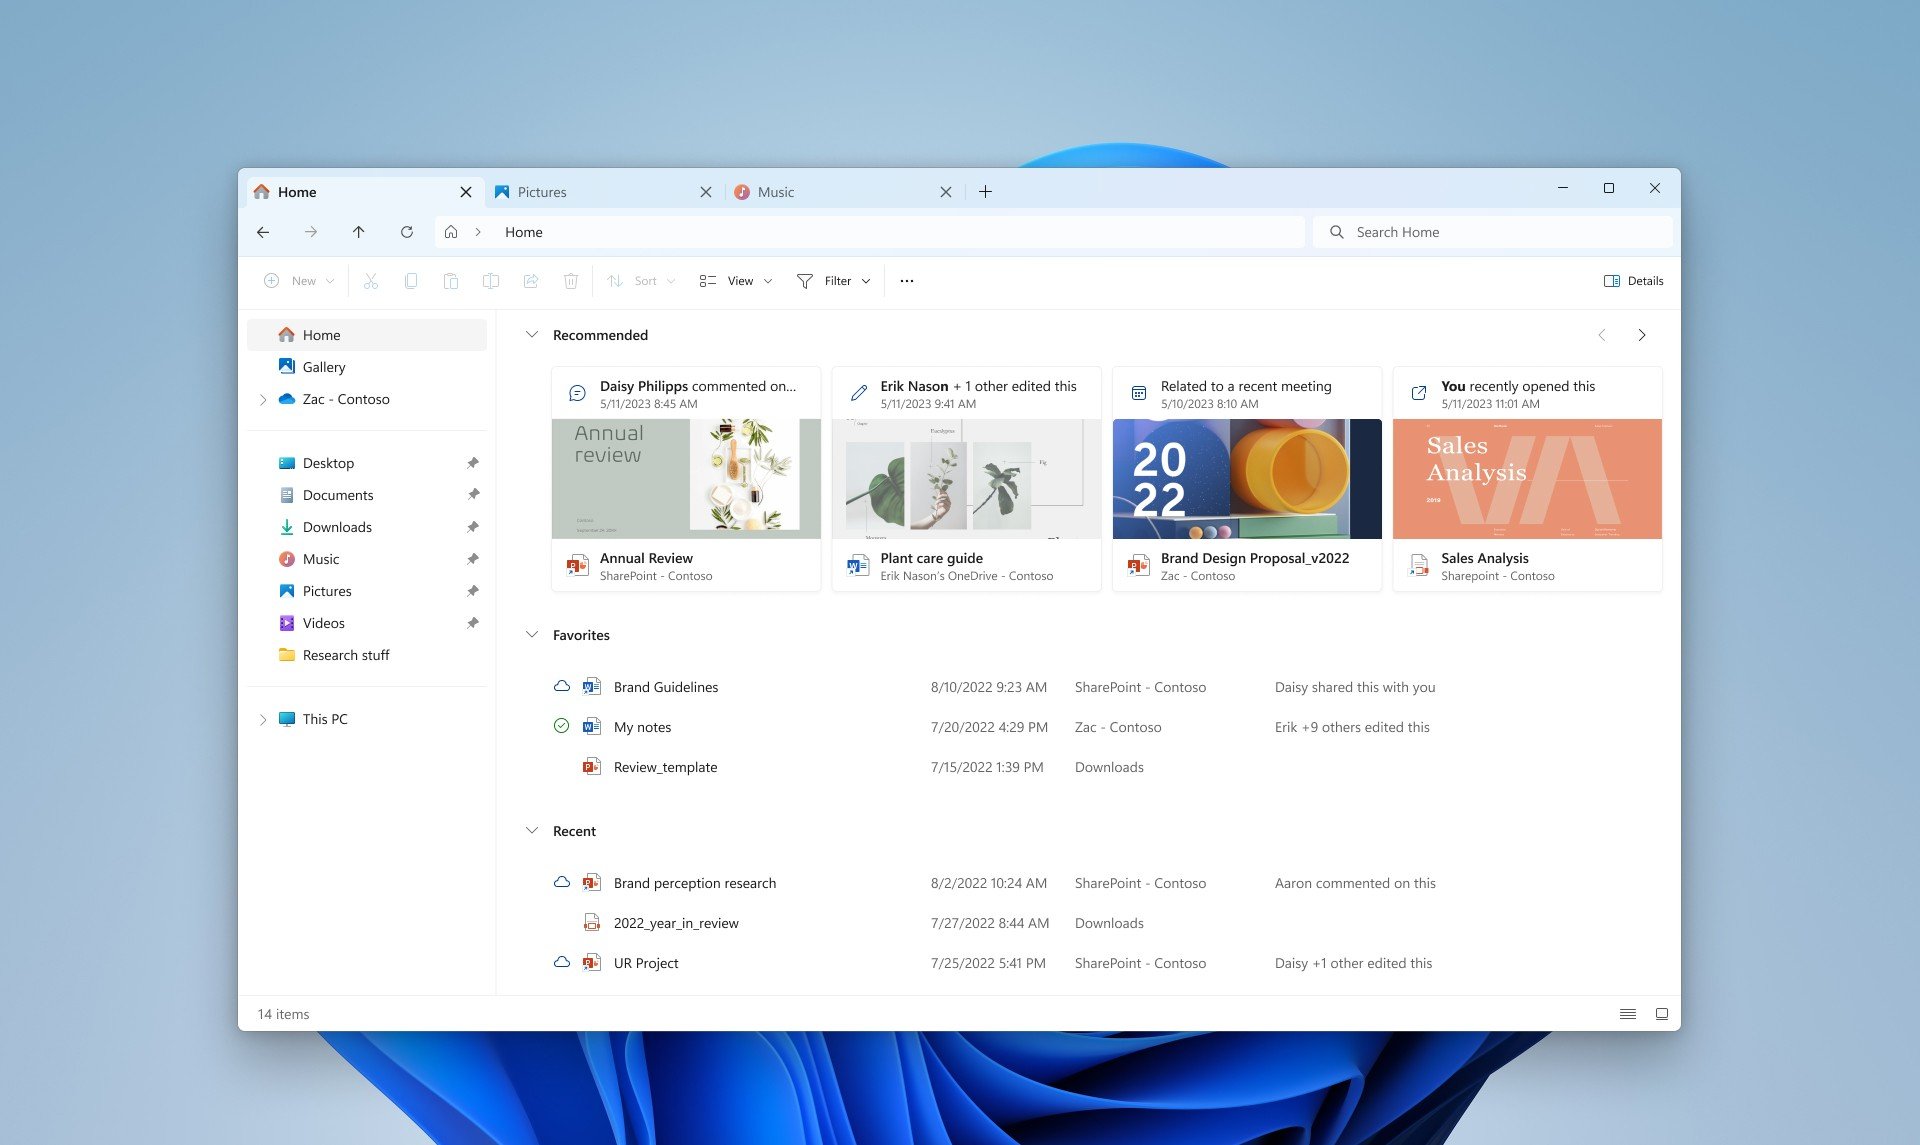 Microsoft has shown an updated "Explorer" in Windows 11